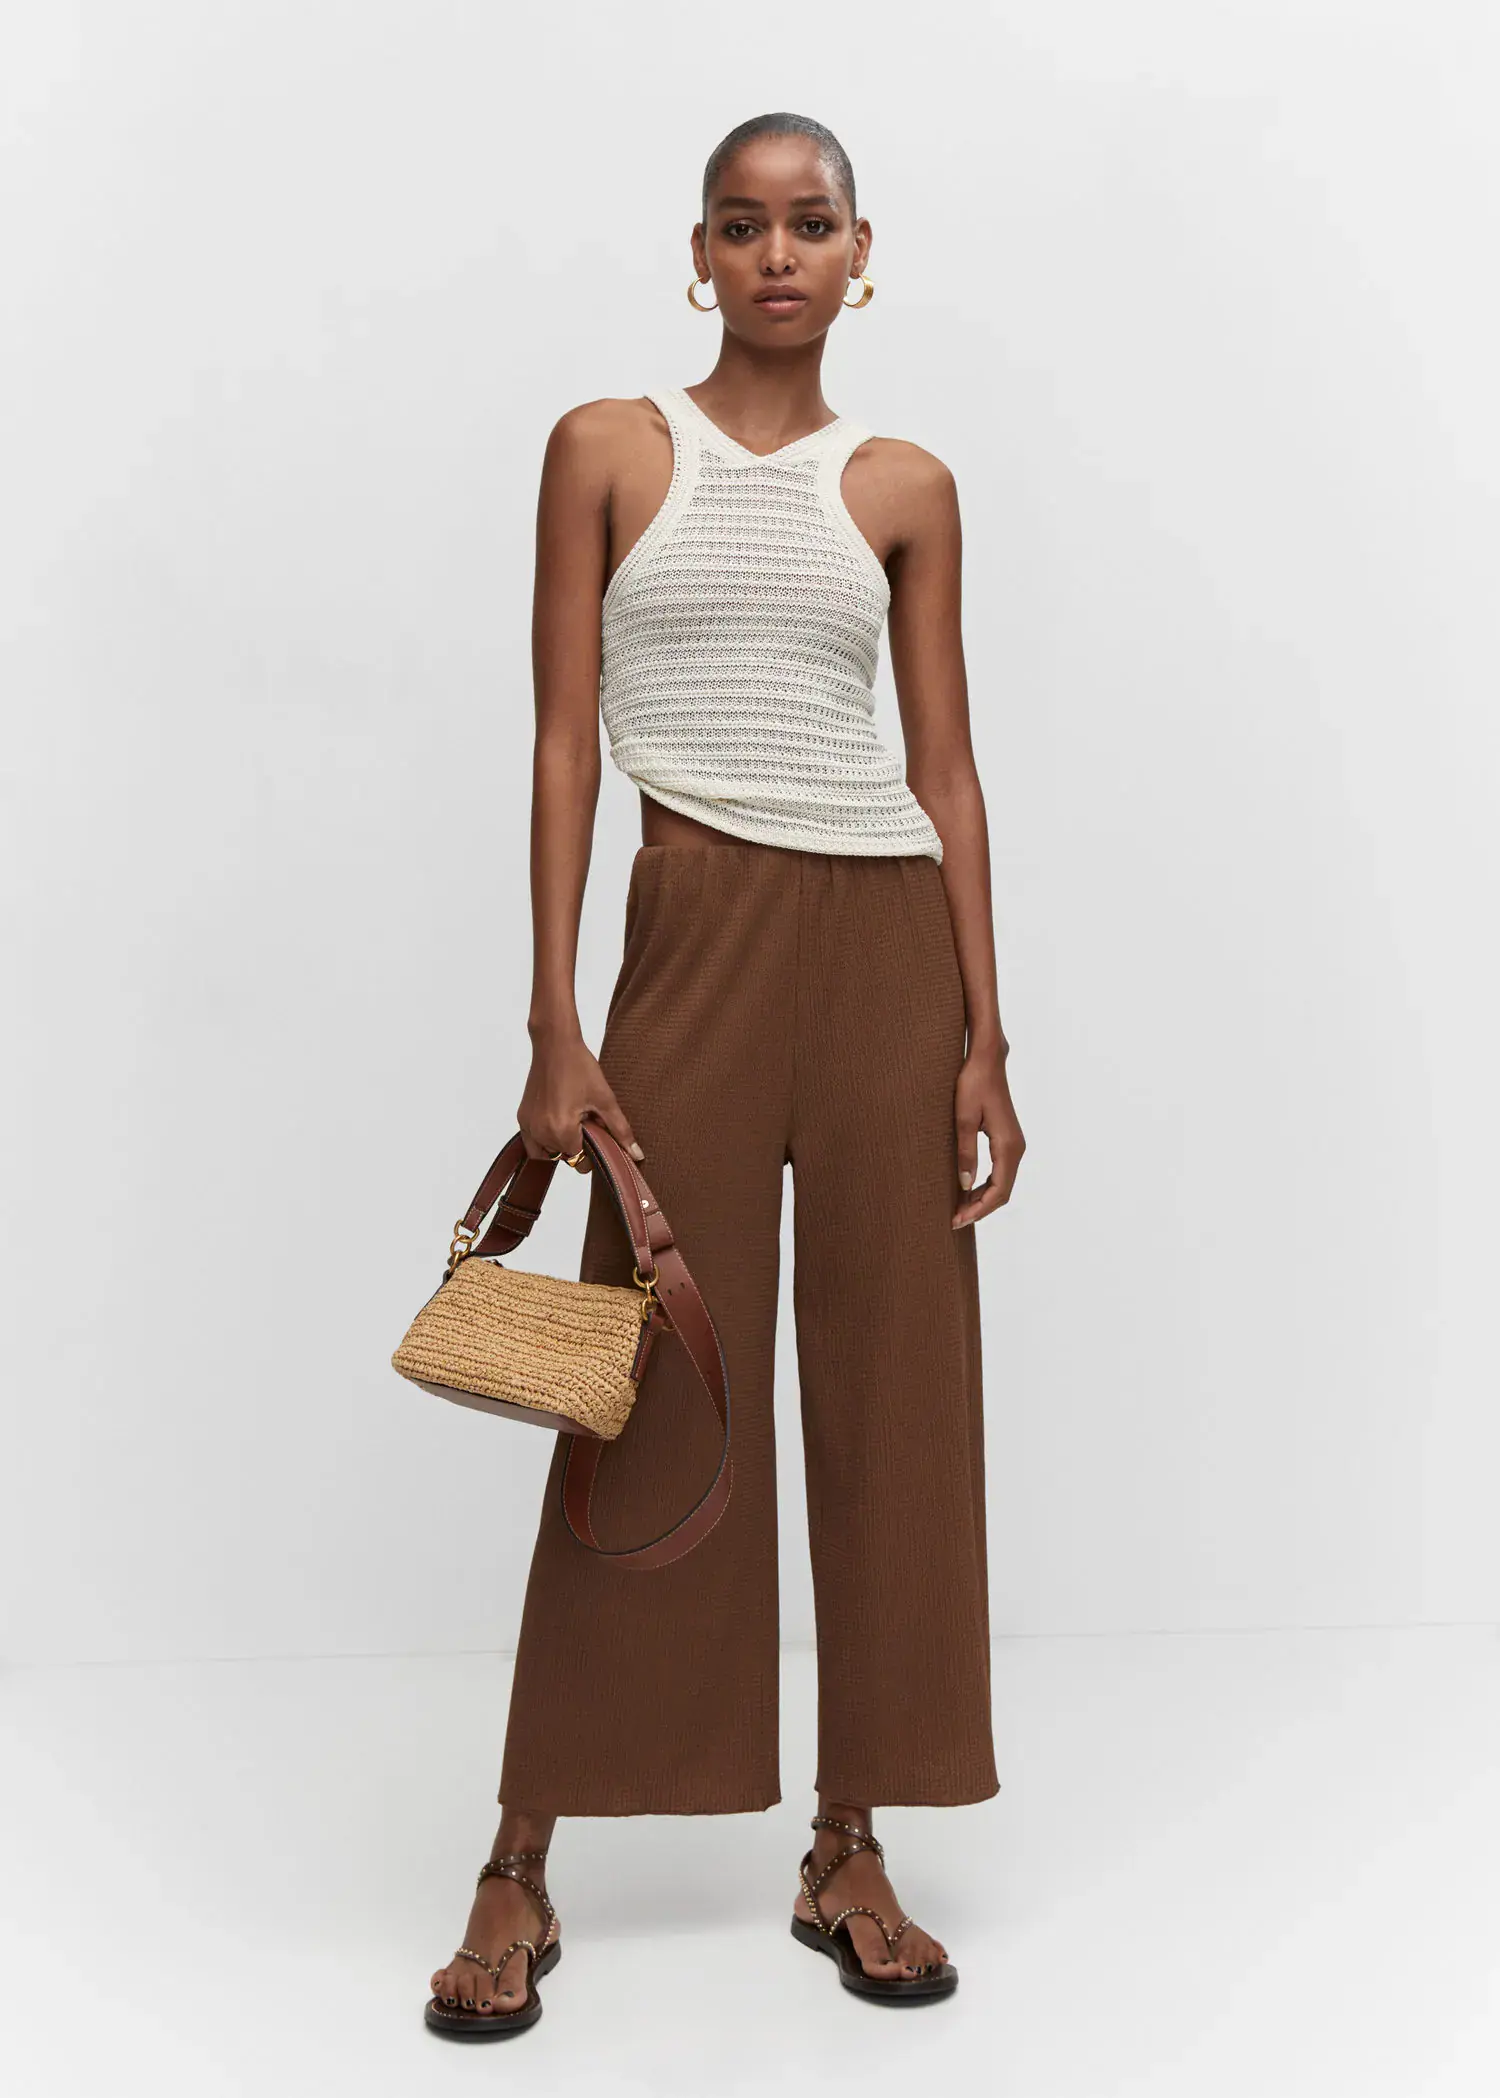 Mango Textured culotte pants. a woman holding a straw bag while standing in a room. 